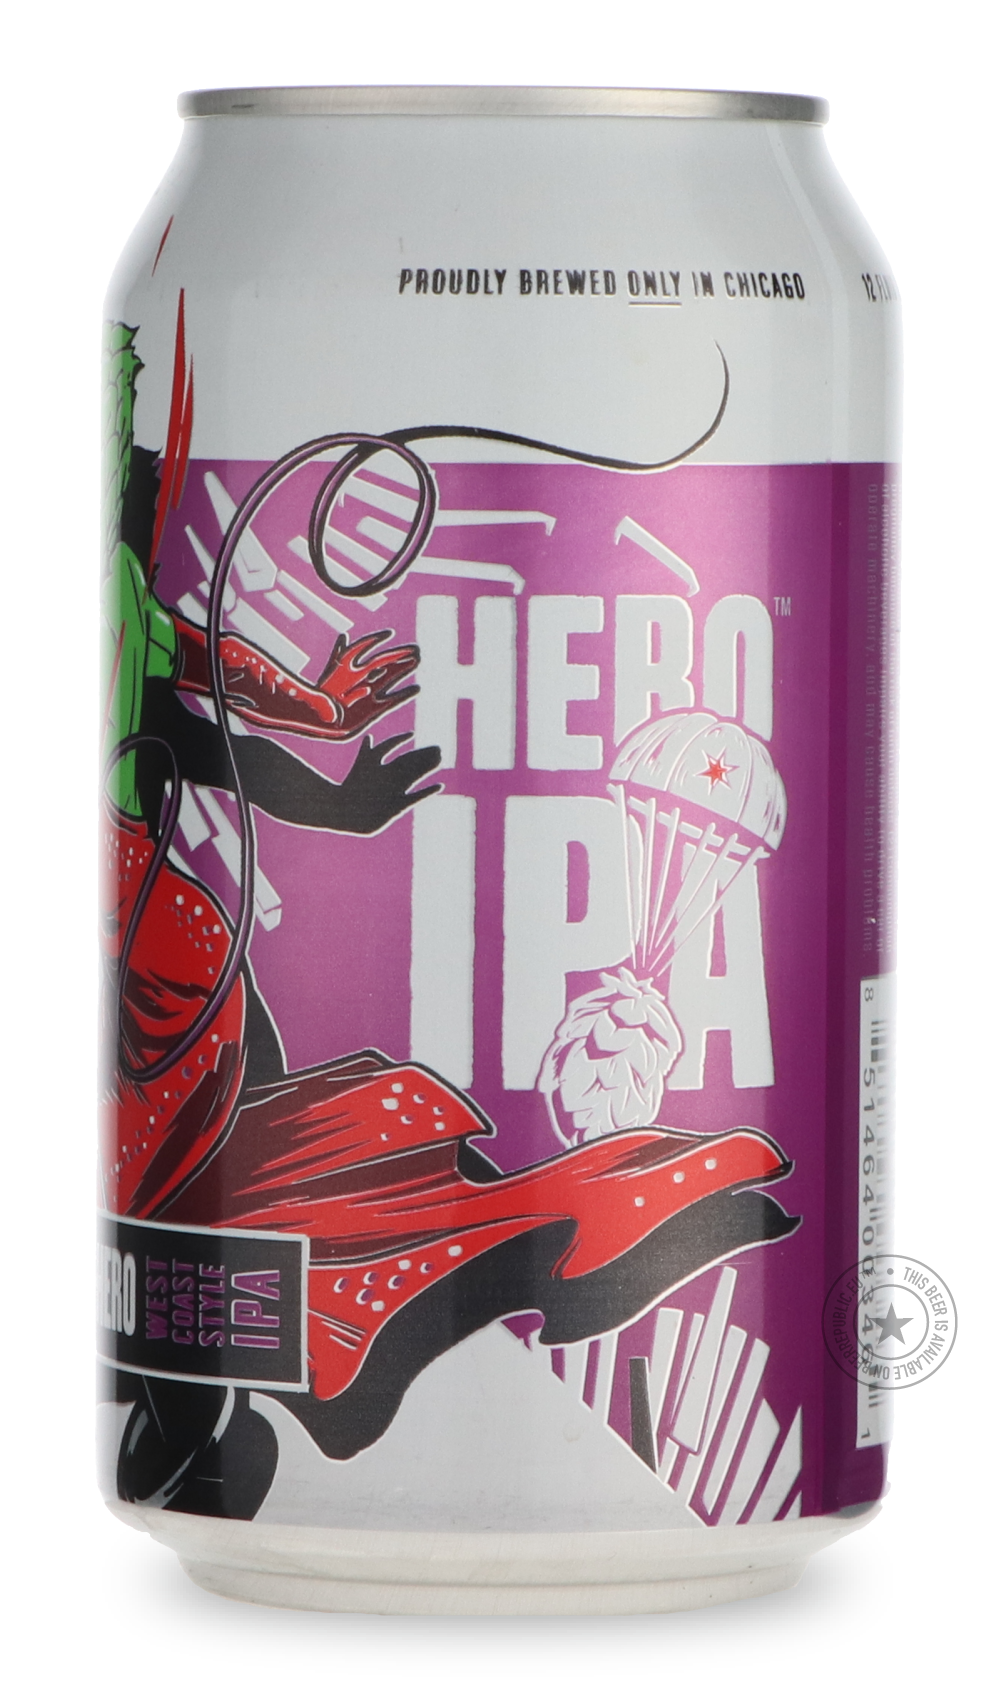 -Revolution- Soul-Hero-IPA- Only @ Beer Republic - The best online beer store for American & Canadian craft beer - Buy beer online from the USA and Canada - Bier online kopen - Amerikaans bier kopen - Craft beer store - Craft beer kopen - Amerikanisch bier kaufen - Bier online kaufen - Acheter biere online - IPA - Stout - Porter - New England IPA - Hazy IPA - Imperial Stout - Barrel Aged - Barrel Aged Imperial Stout - Brown - Dark beer - Blond - Blonde - Pilsner - Lager - Wheat - Weizen - Amber - Barley Win